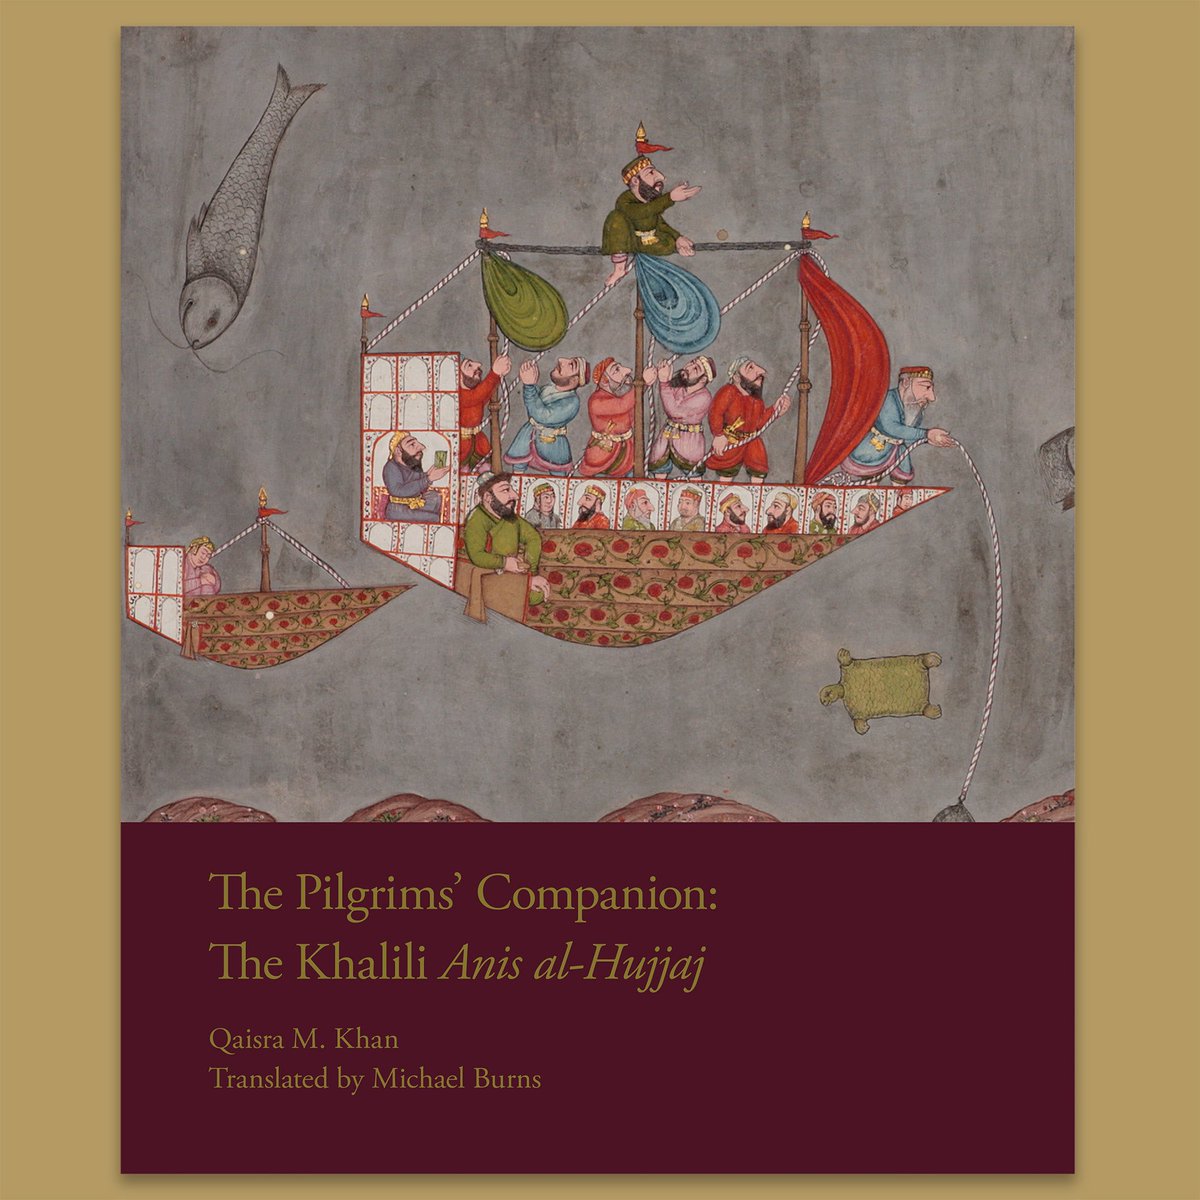 Get ready to embark on a journey with our forthcoming book “The Pilgrims’ Companion: The Khalili Anis al-Hujjaj”. This is a ground-breaking new translation of the Anis al-Hujjaj, with an introduction by @Qaisra_Khan & translated by Michael Burns. #newbooks